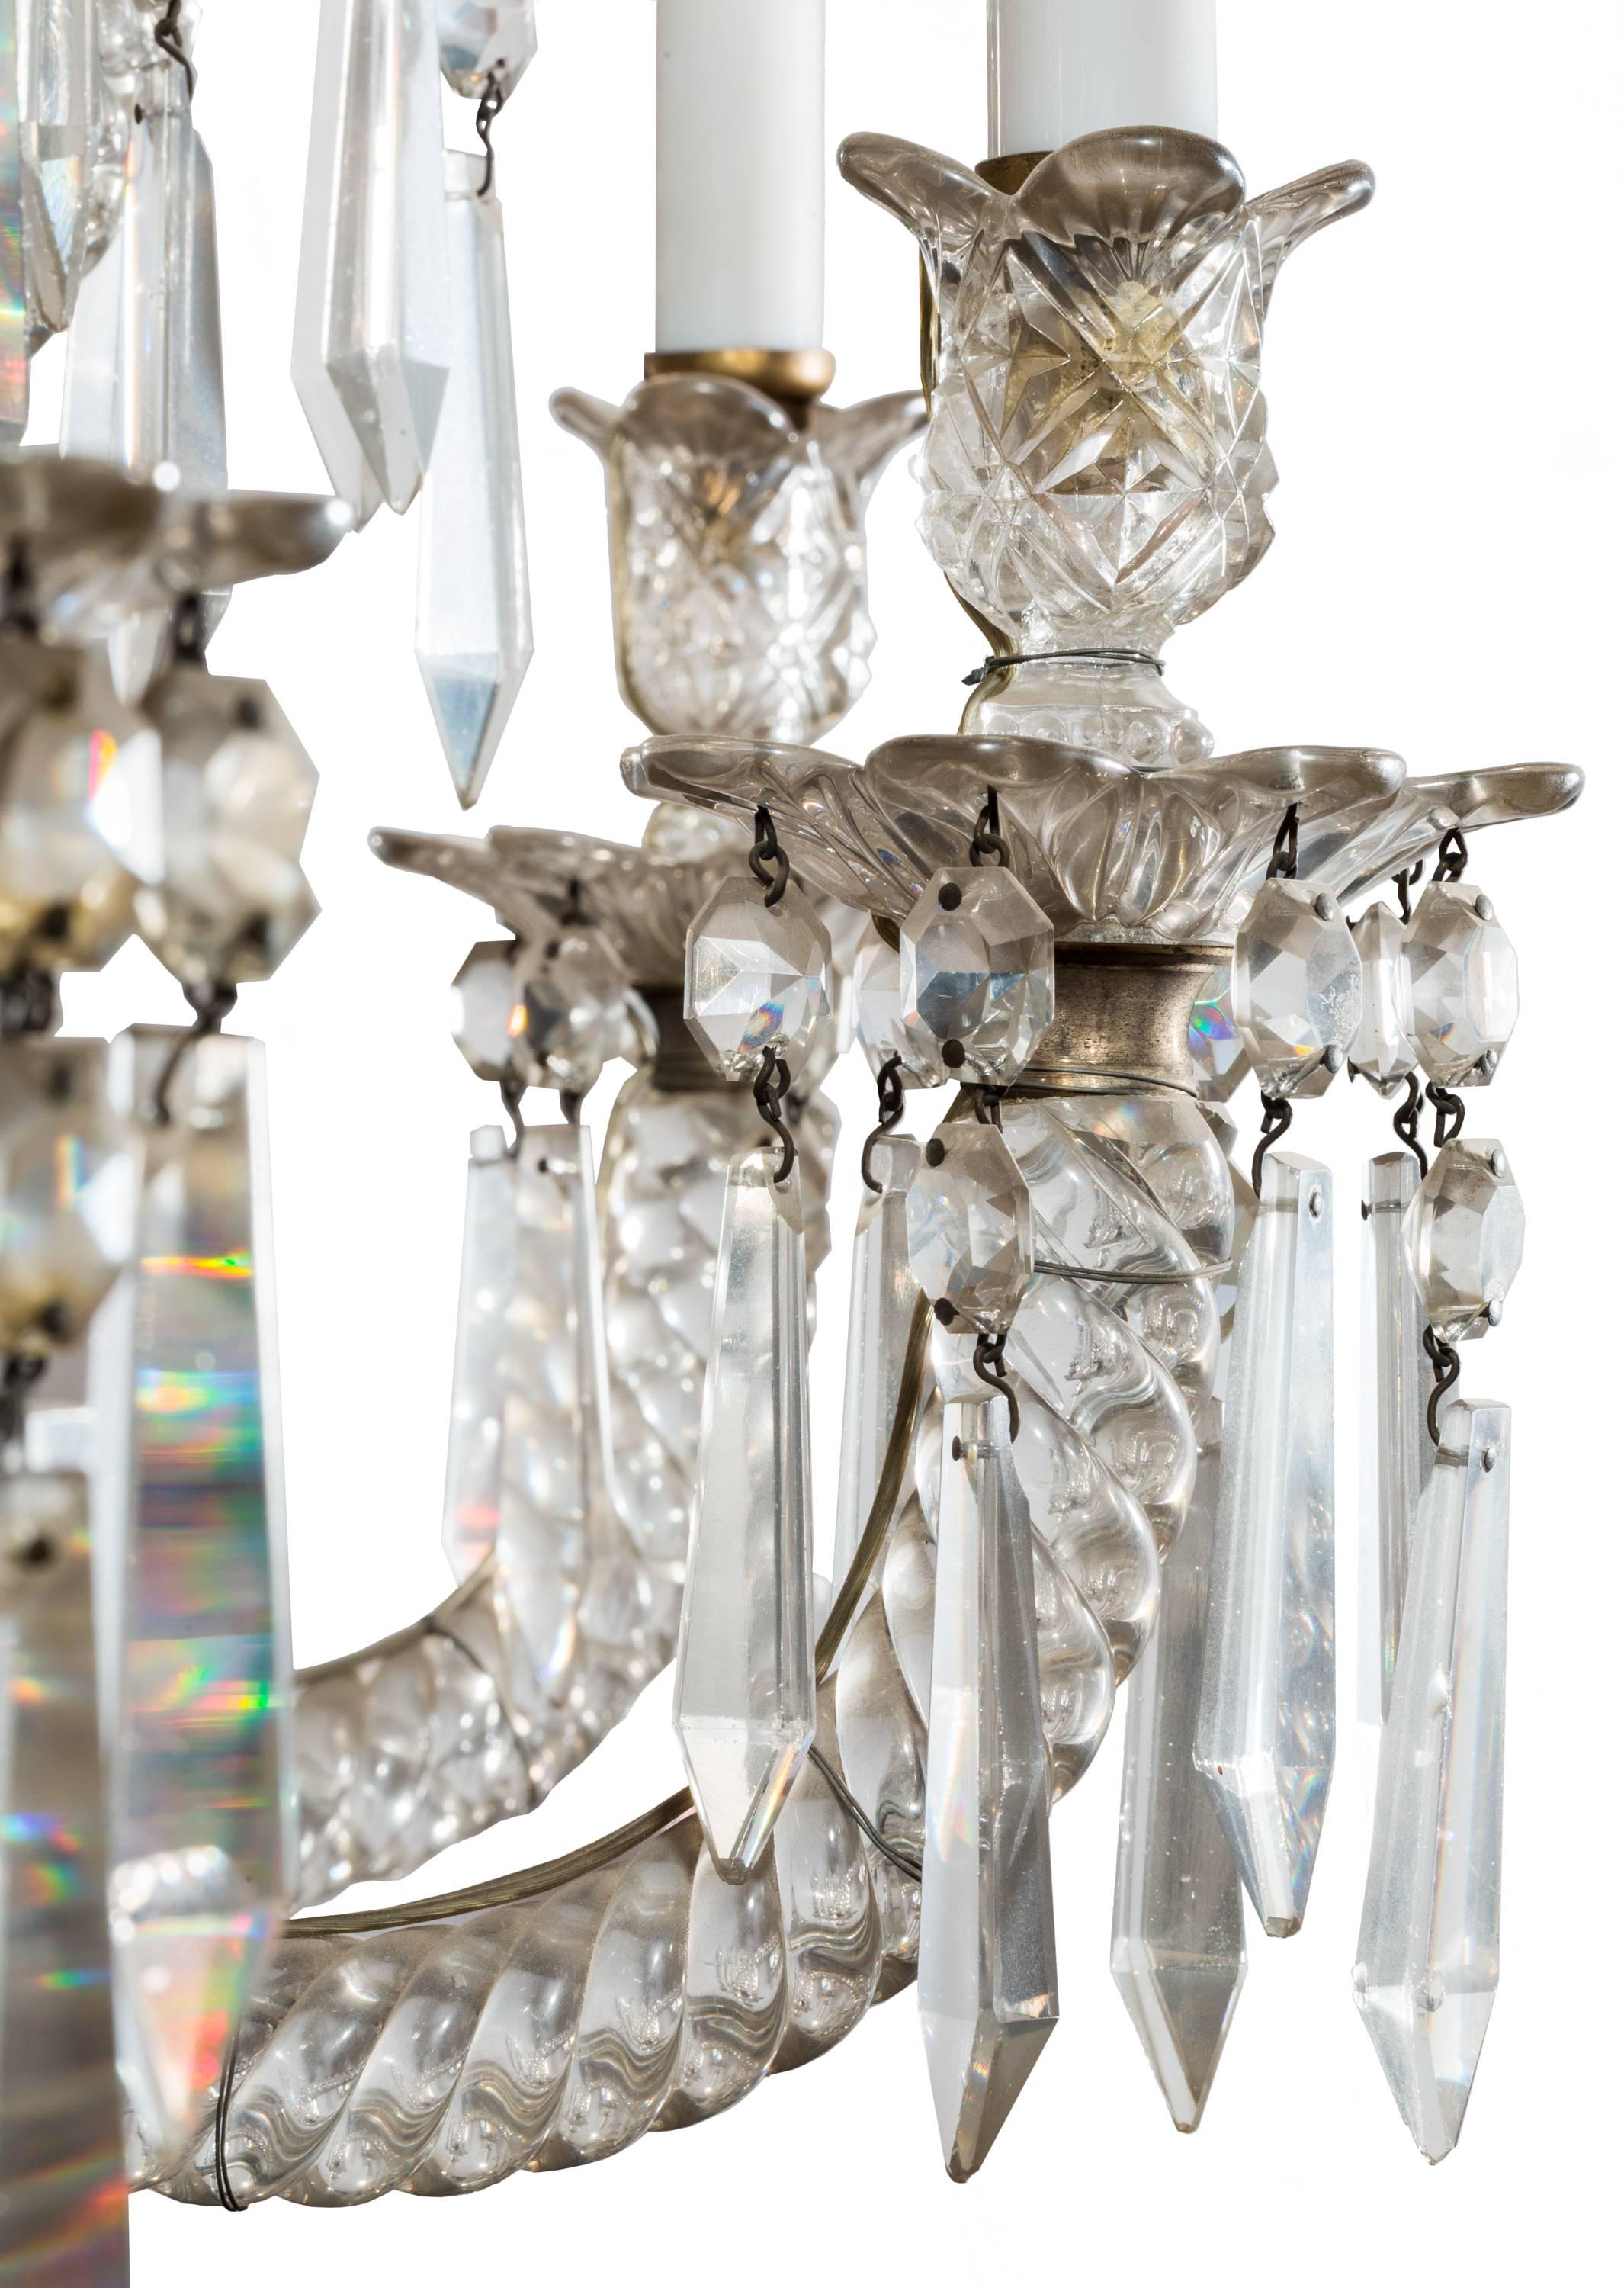 19th century baccarat chandeliers